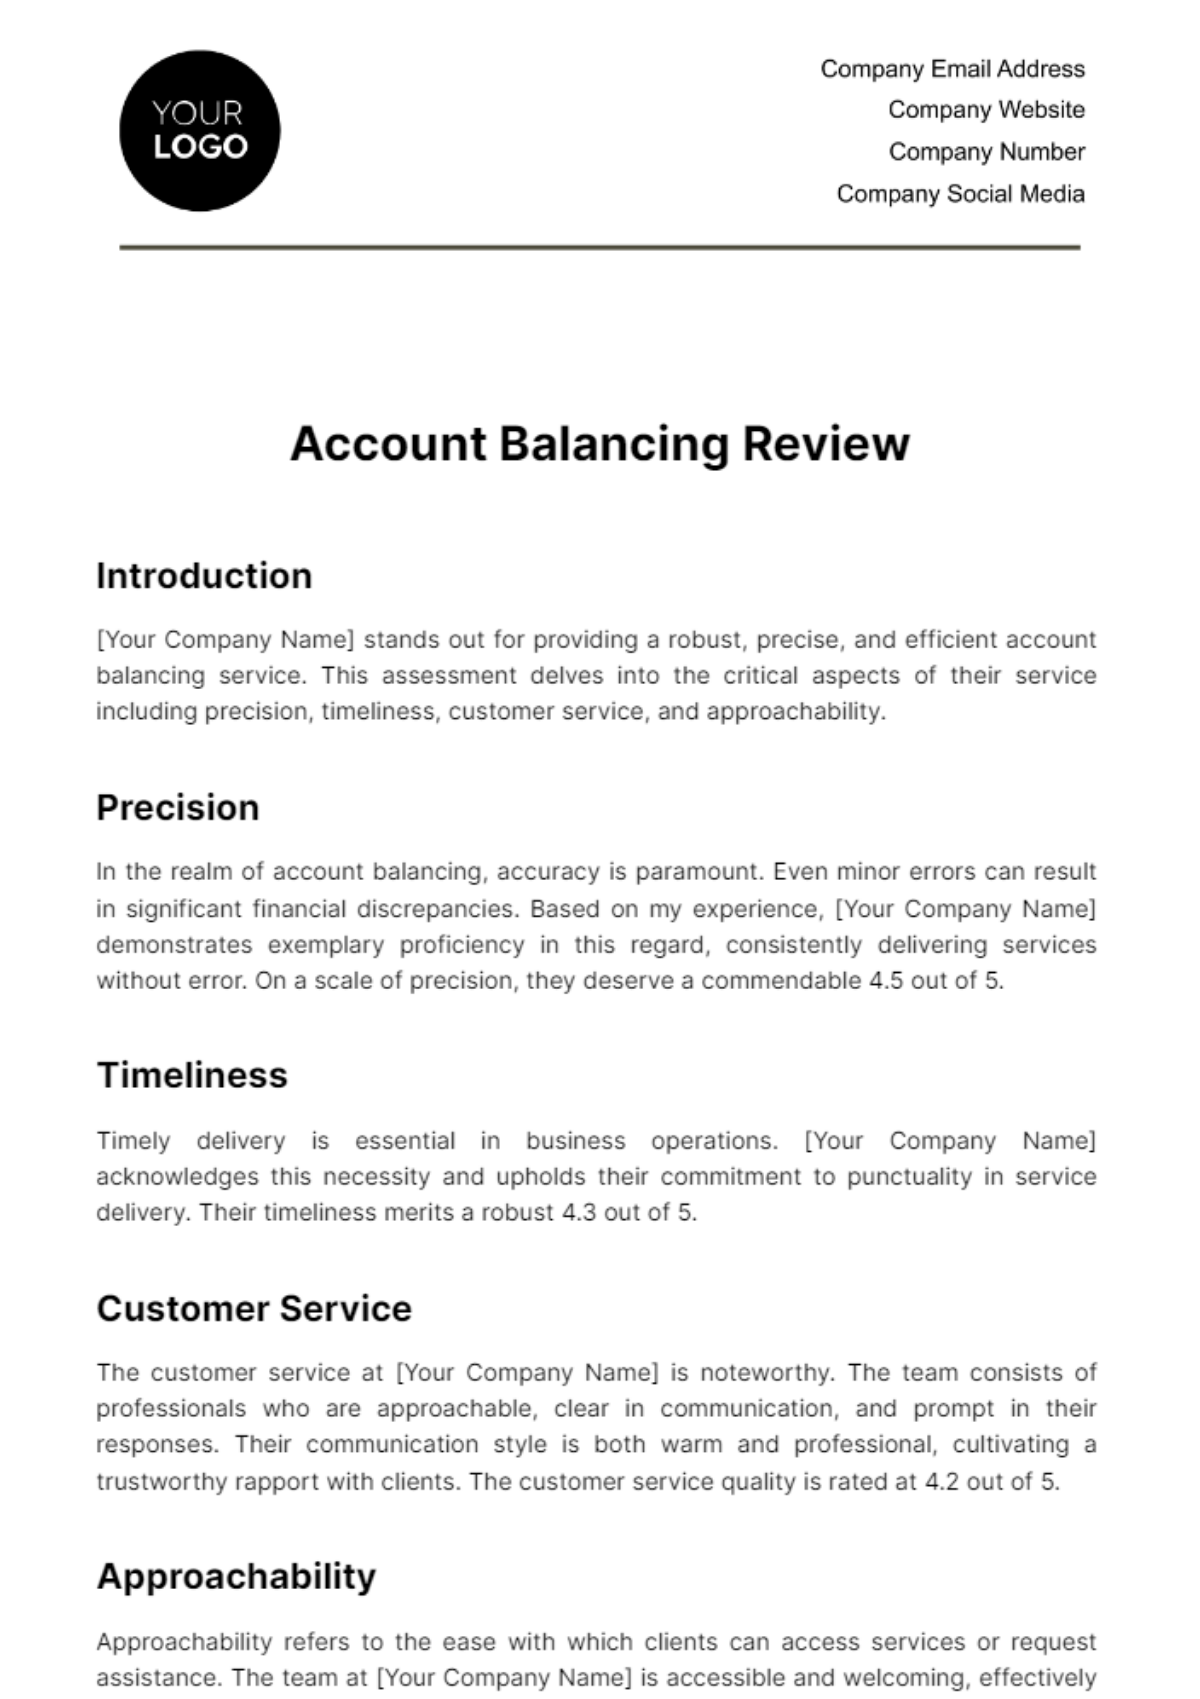 Free Account Balancing Review Template